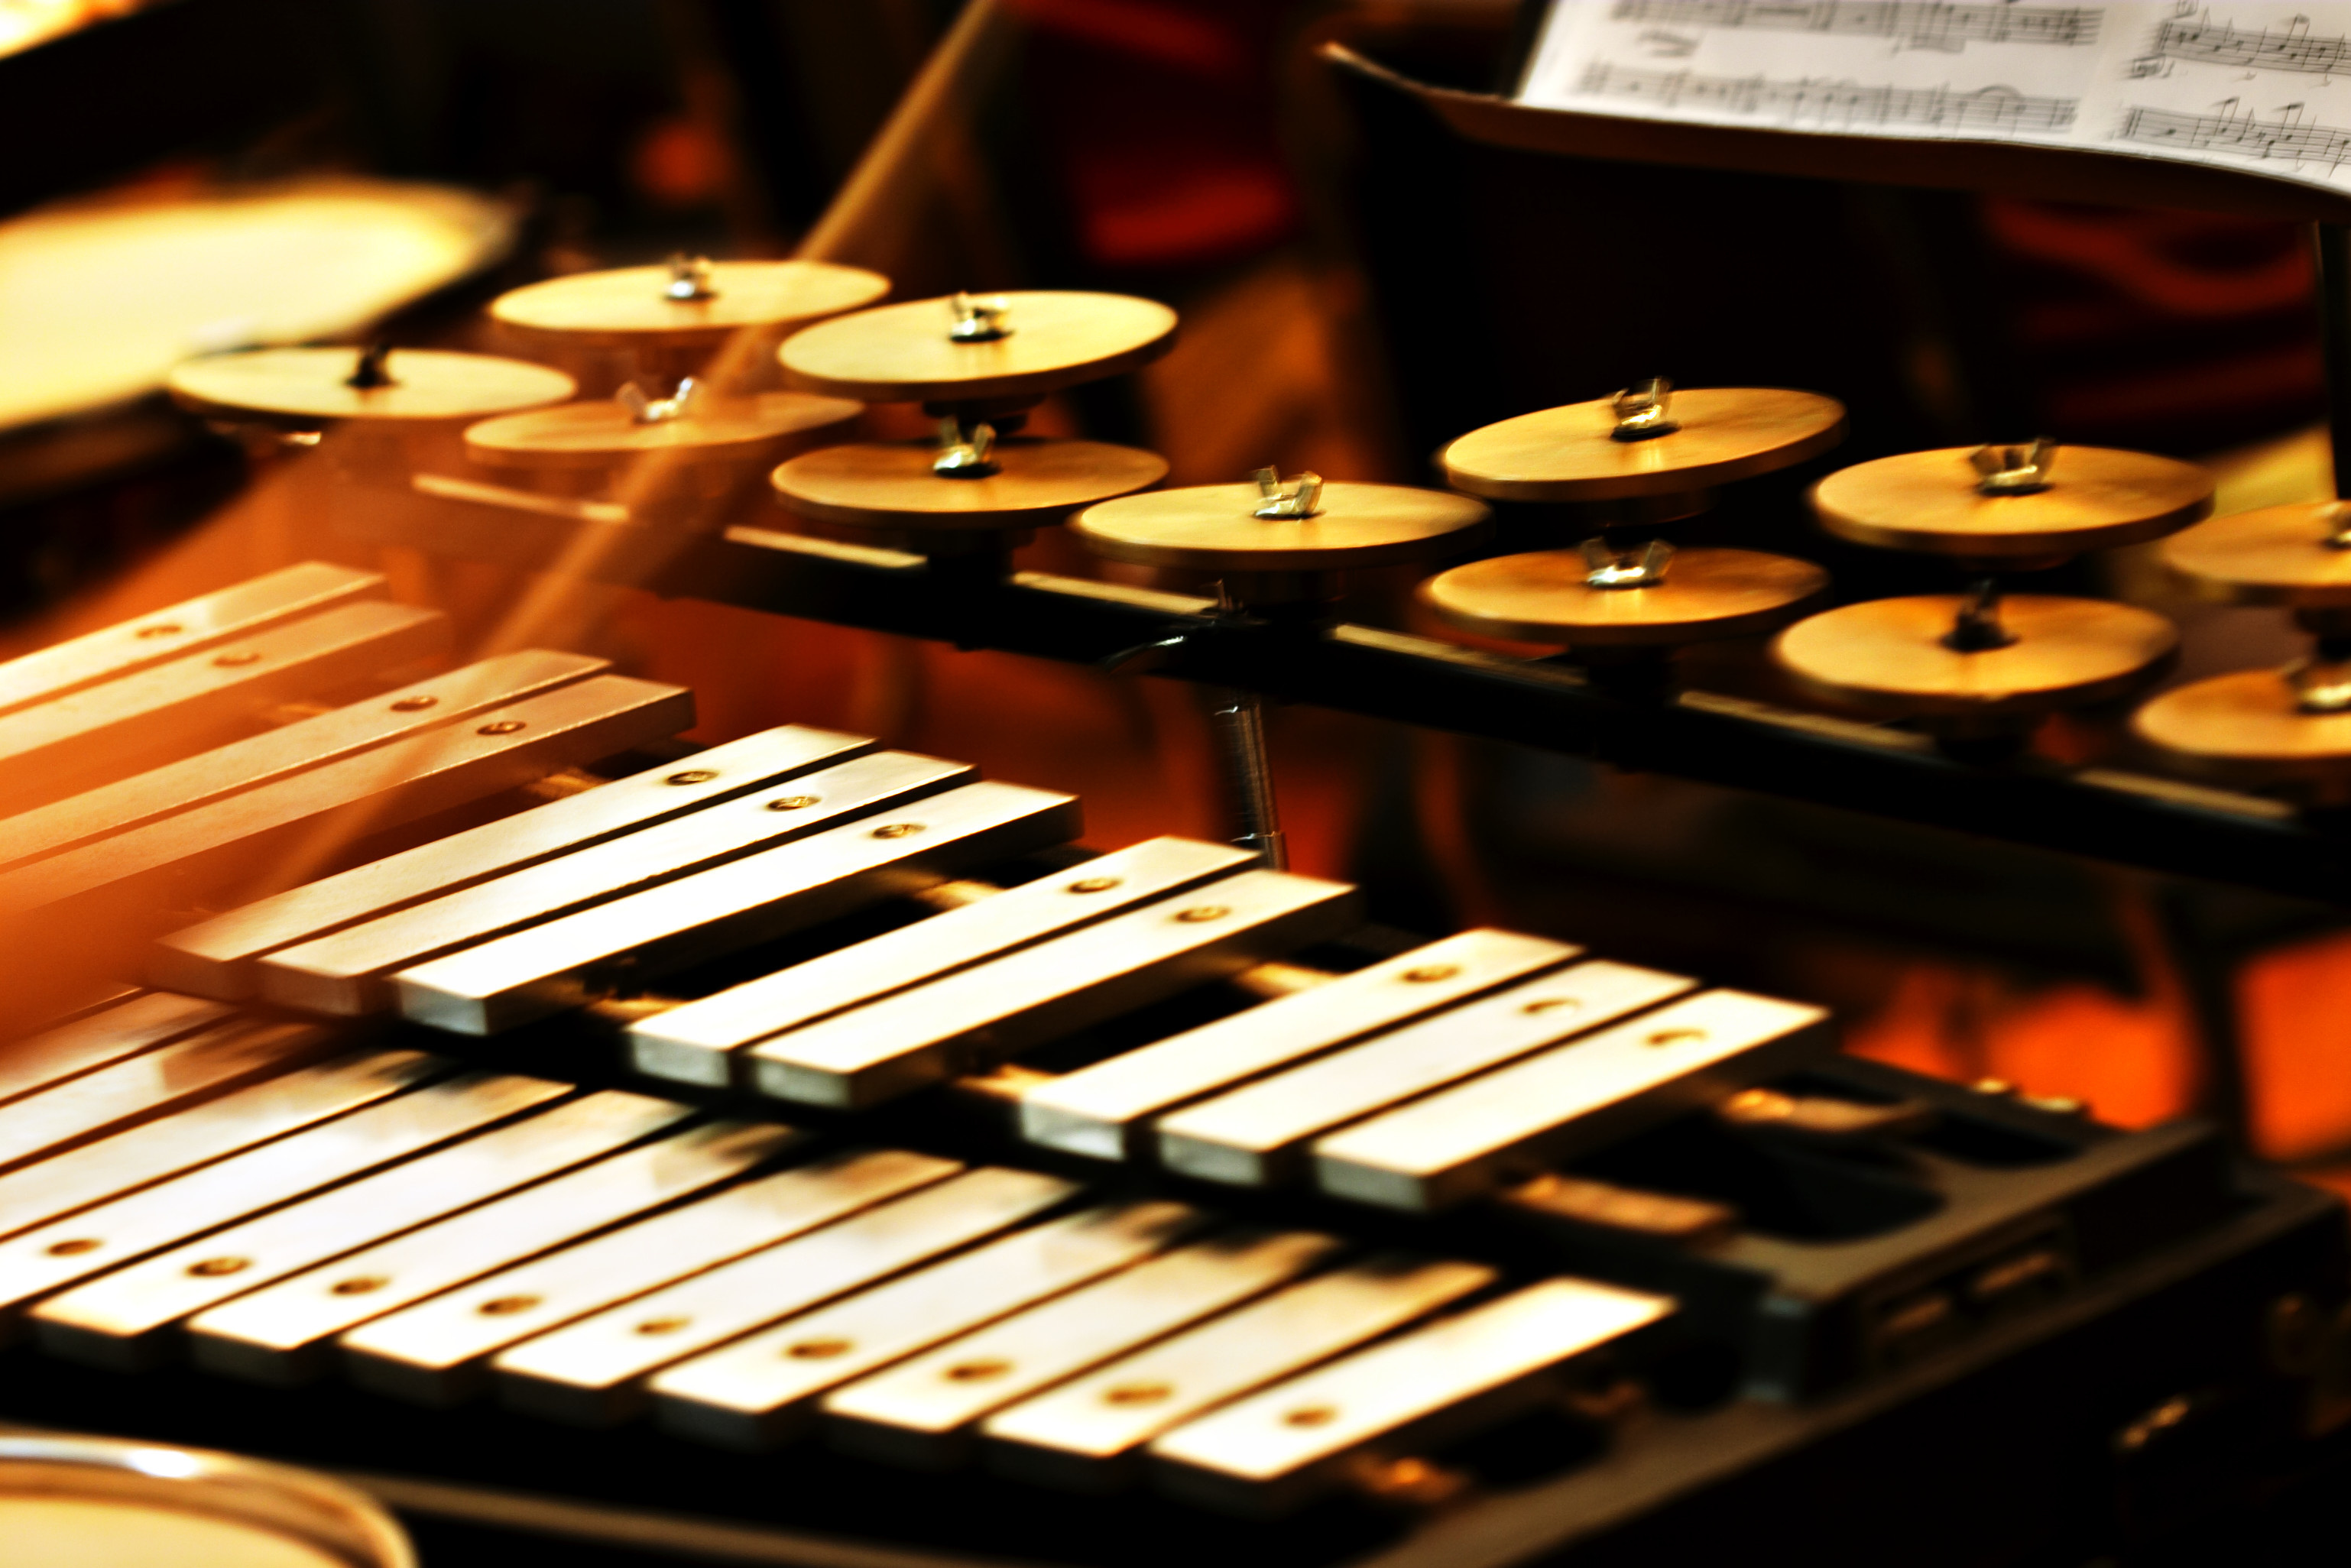 Xylophone: Keyboard Percussion Instrument, Glockenspiel Type, Aluminum Or Steel Bars Are Used Instead Of Wooden Ones. 3080x2060 HD Wallpaper.